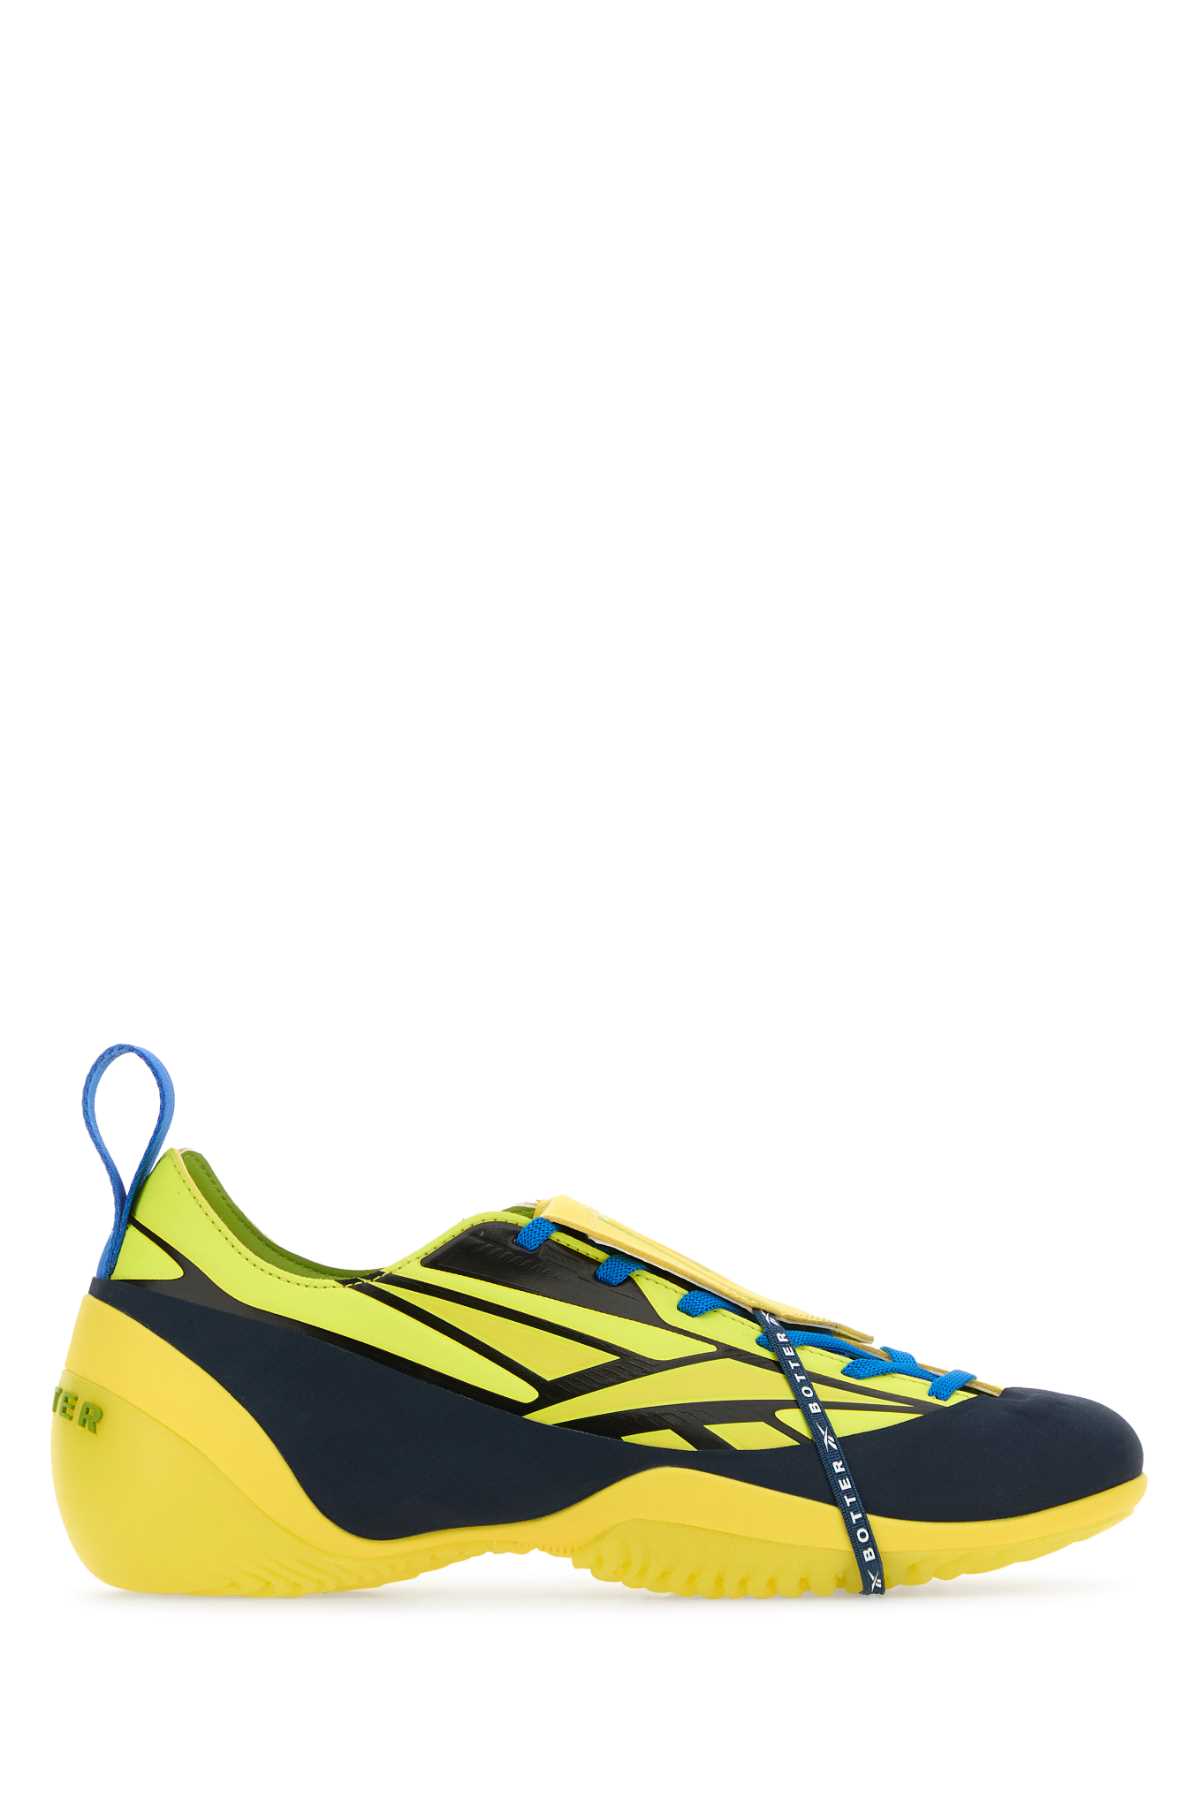 Shop Reebok Multicolor Rubber And Fabric  X Botter Energia Bo Kã¨ts Sneakers In Yellowblue